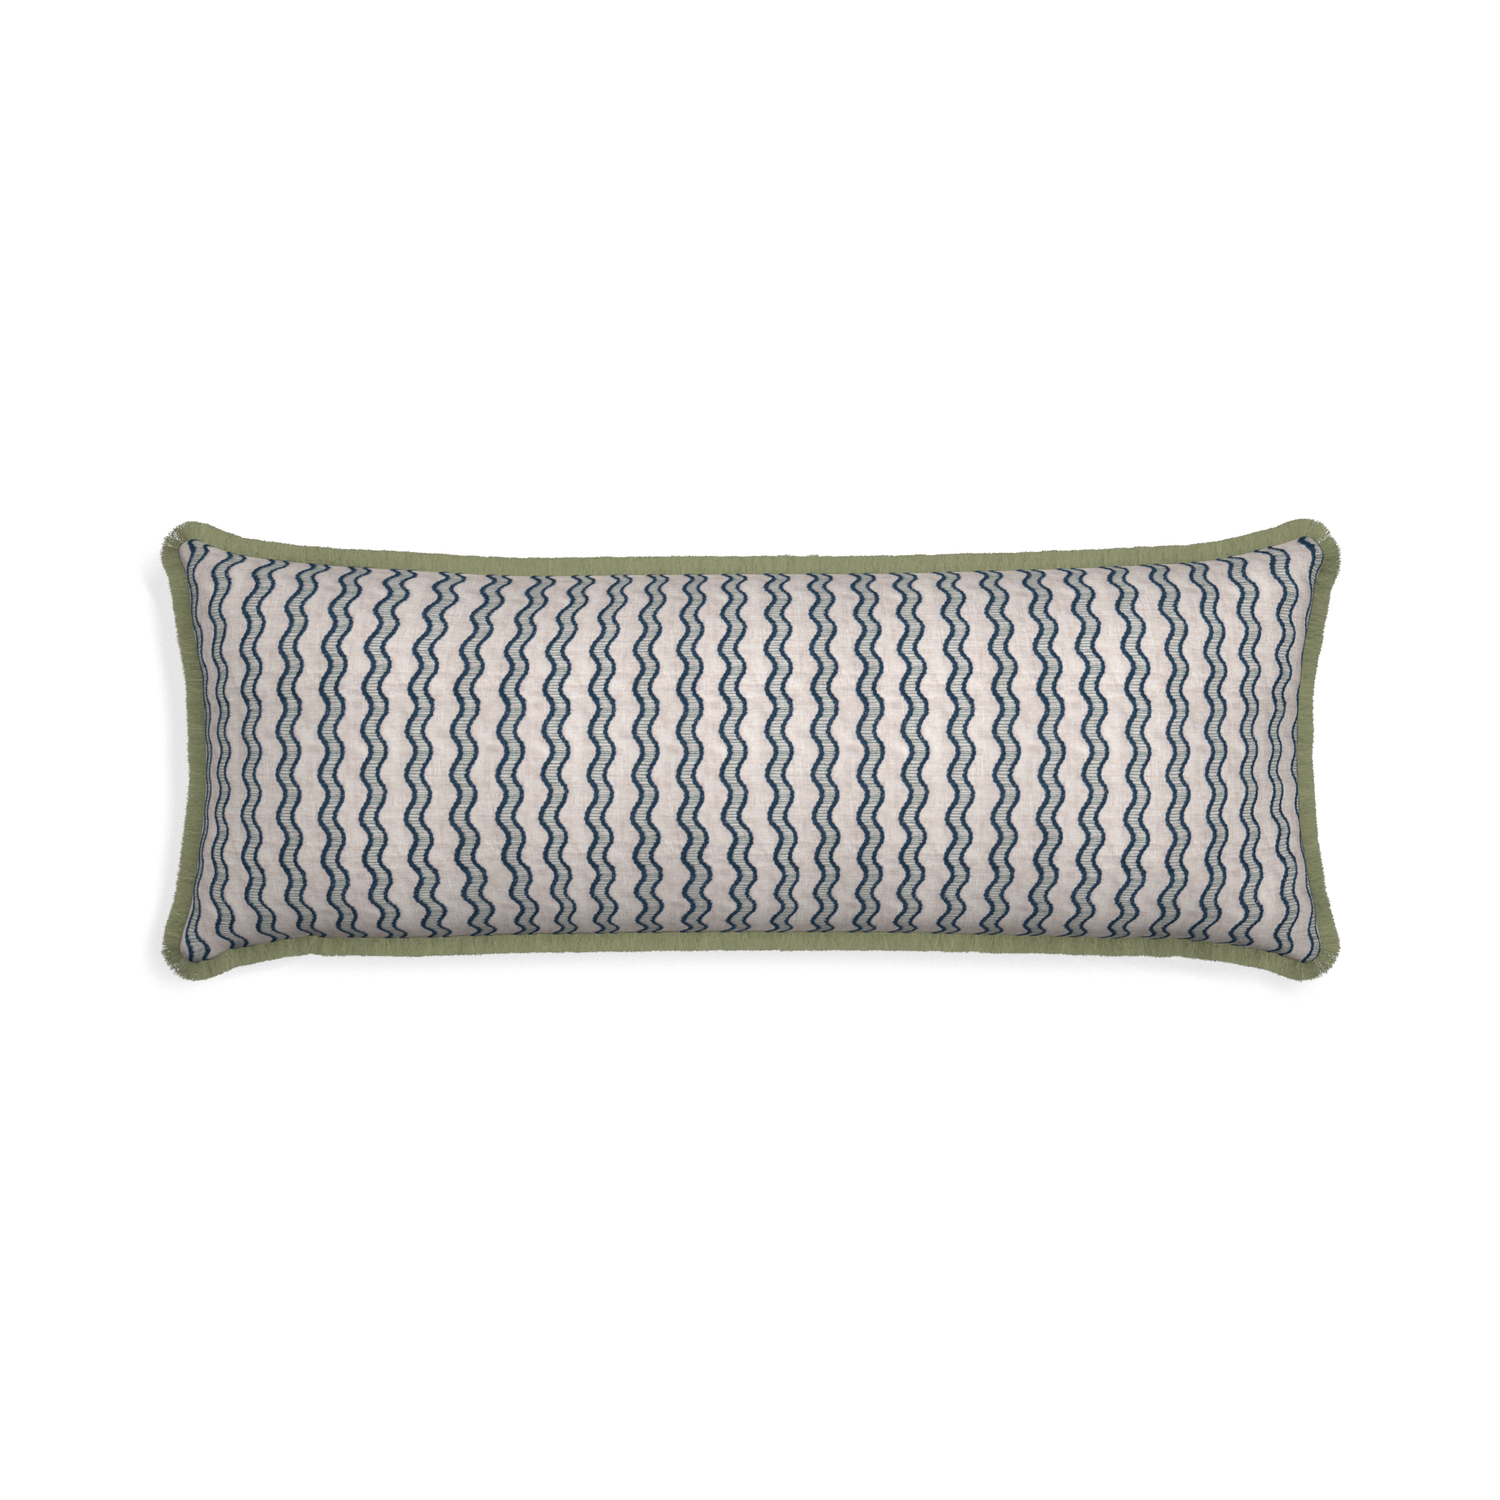 Xl-lumbar beatrice custom embroidered wavepillow with sage fringe on white background